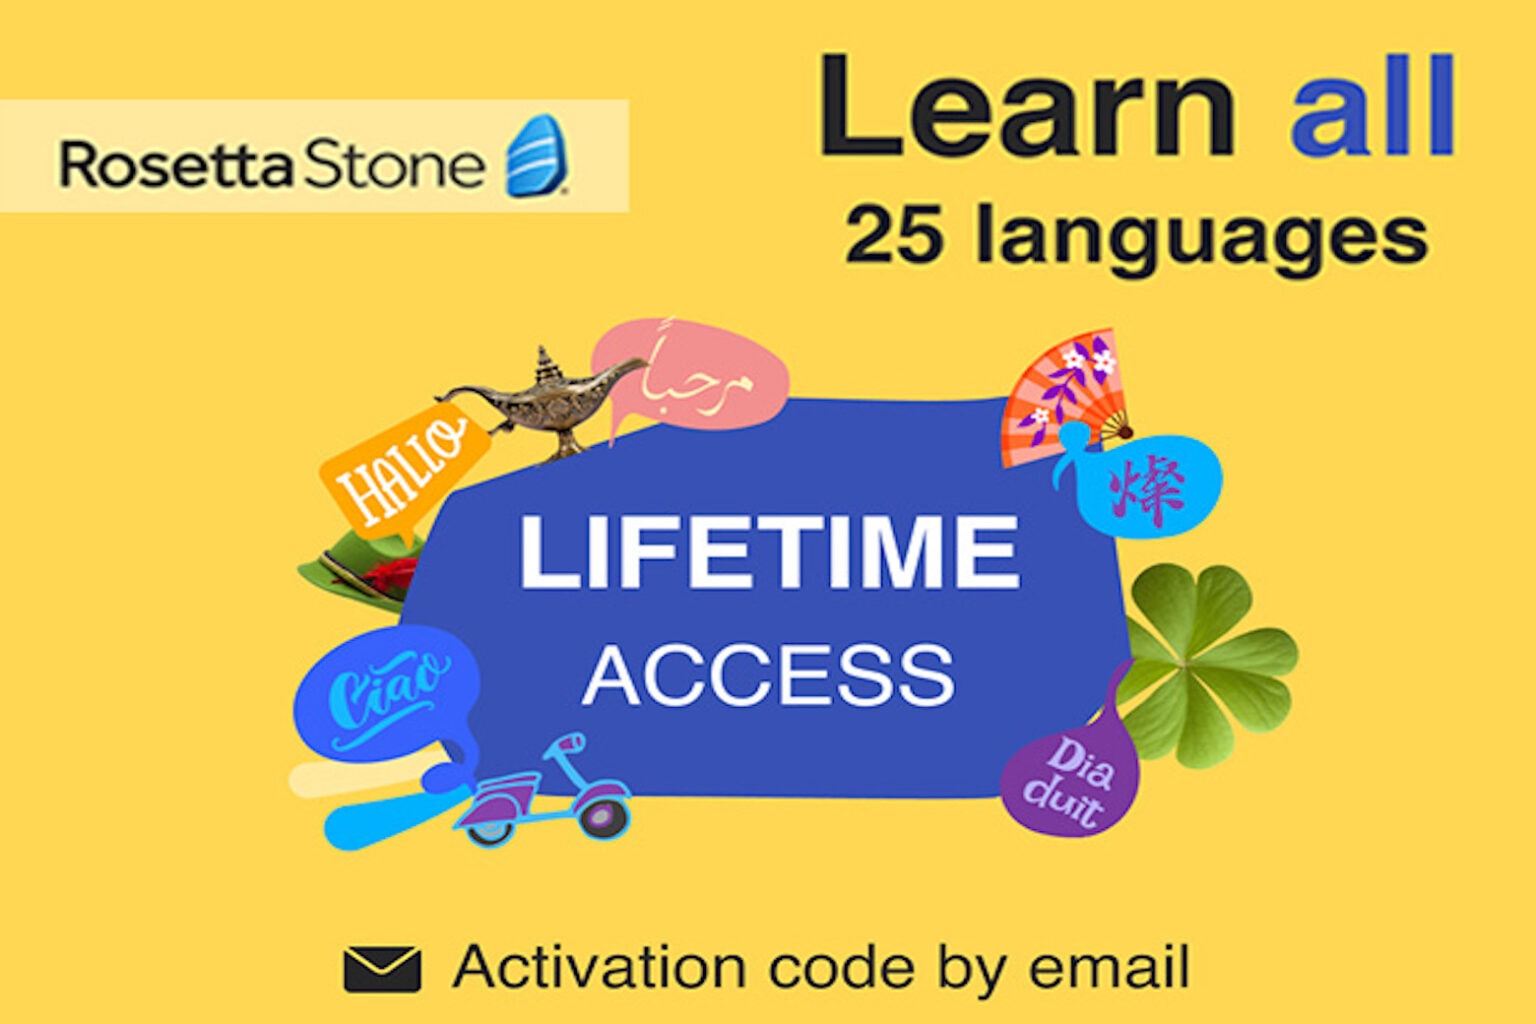 Learn new languages for life with an additional $30 off Rosetta Stone.